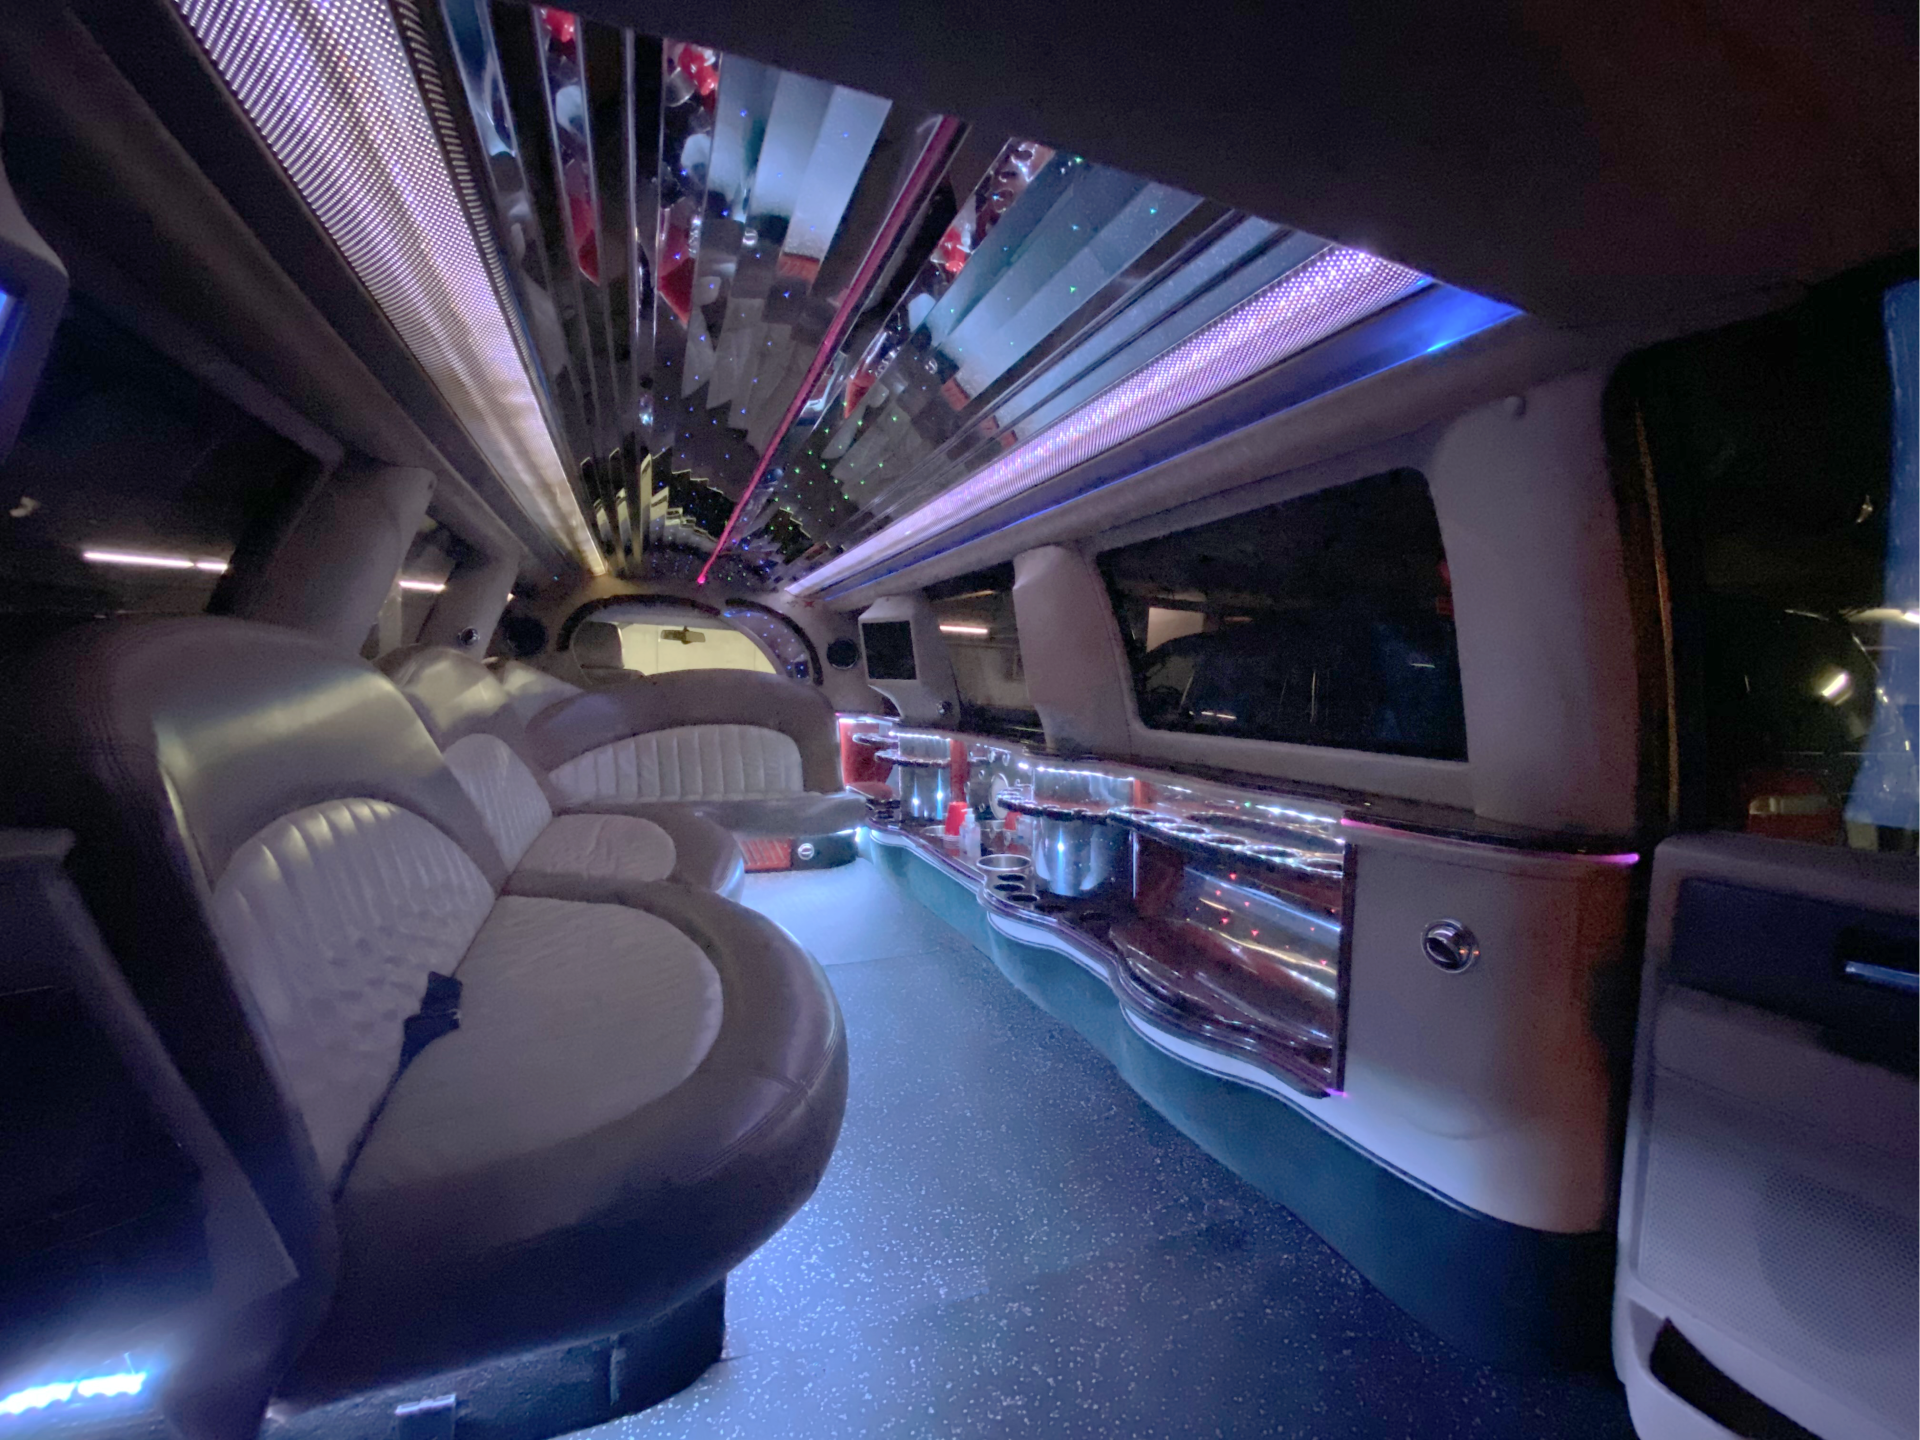 stretch limousine interior with LED lighting and side bar area